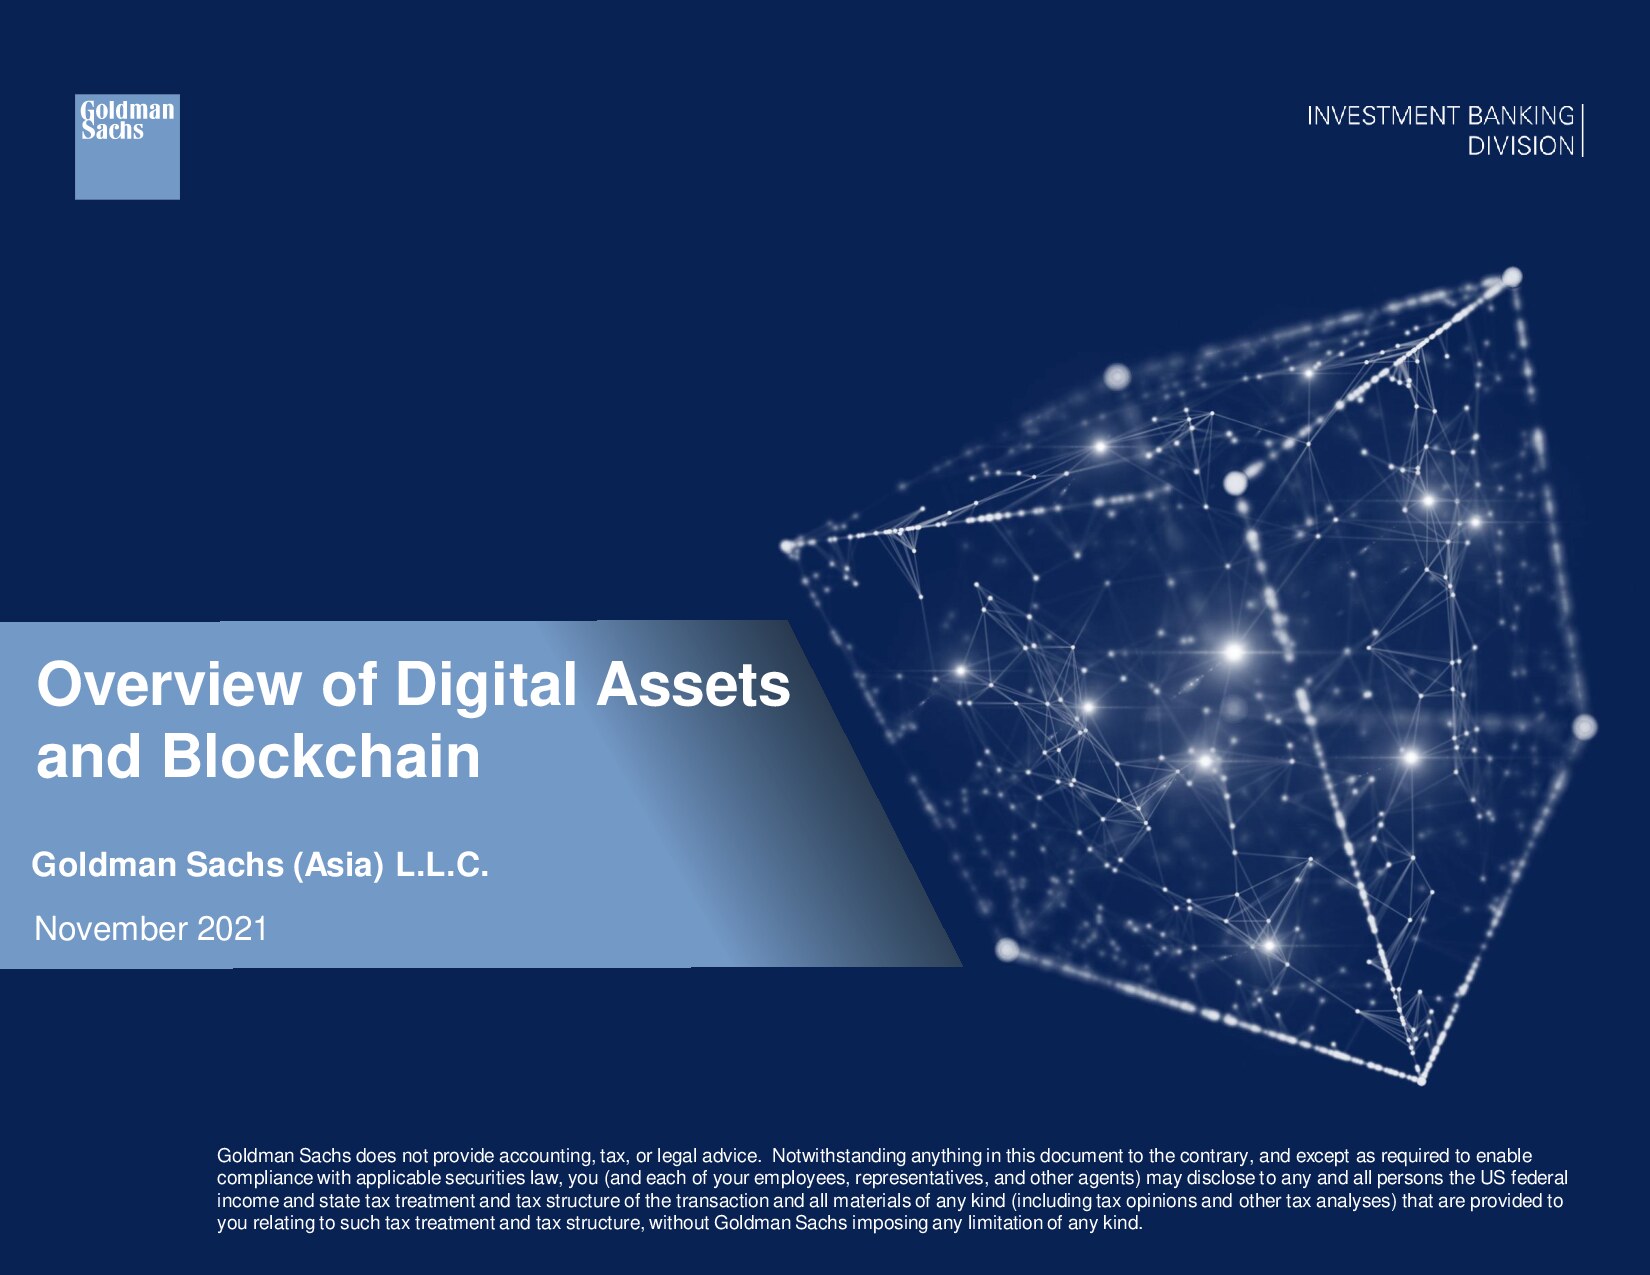 Goldman Sachs Overview of Digital Assets and Blockchain